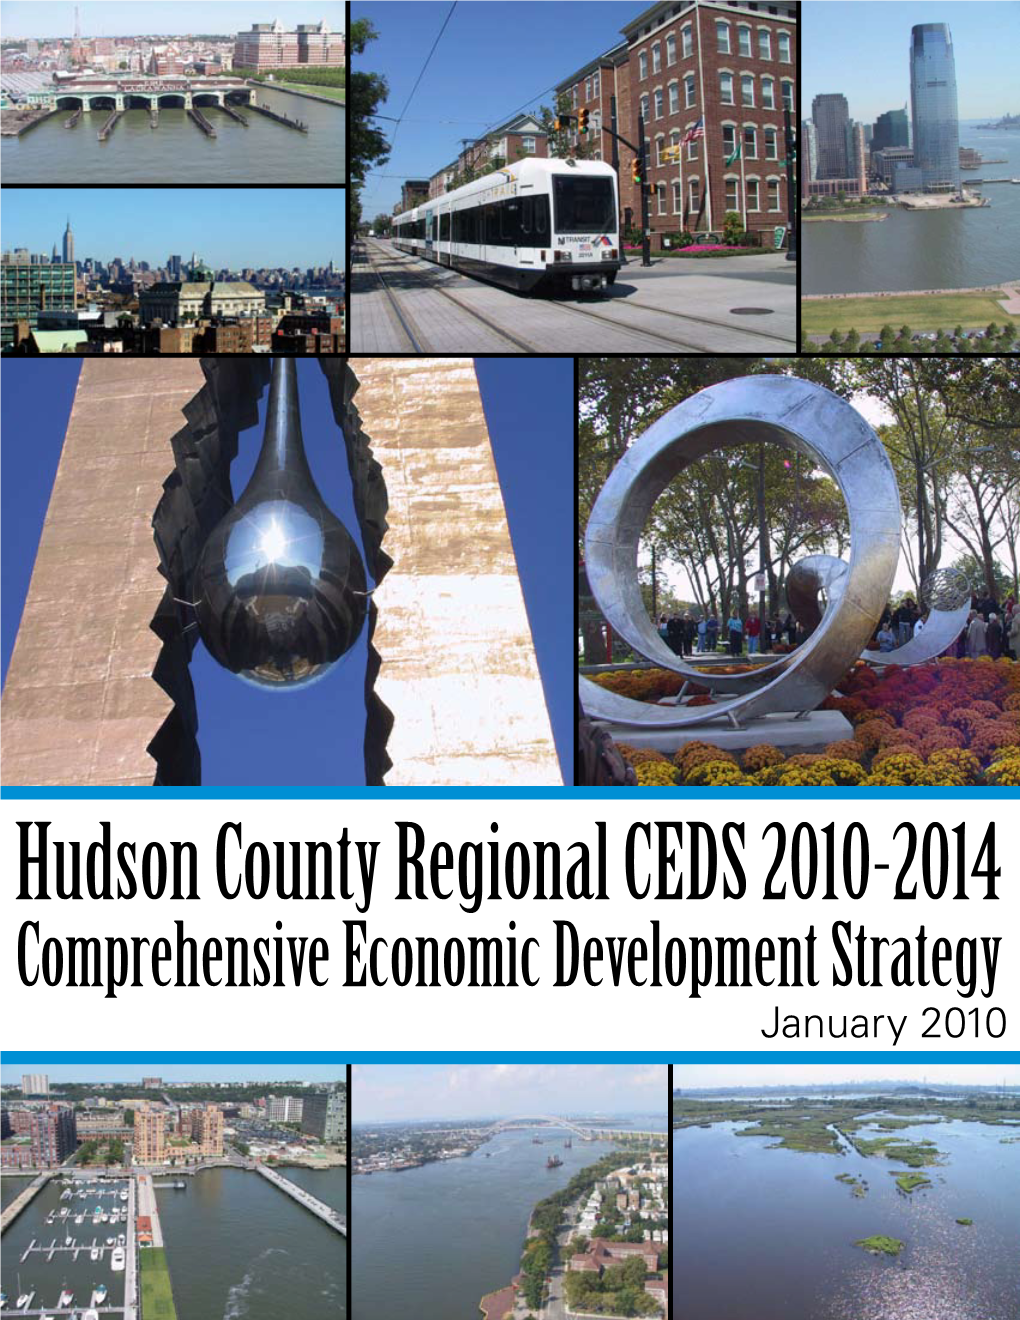 Hudson County Regional CEDS 2010-2014 Comprehensive Economic Development Strategy January 2010 Preparation and Approval of the Regional CEDS 2010-2014